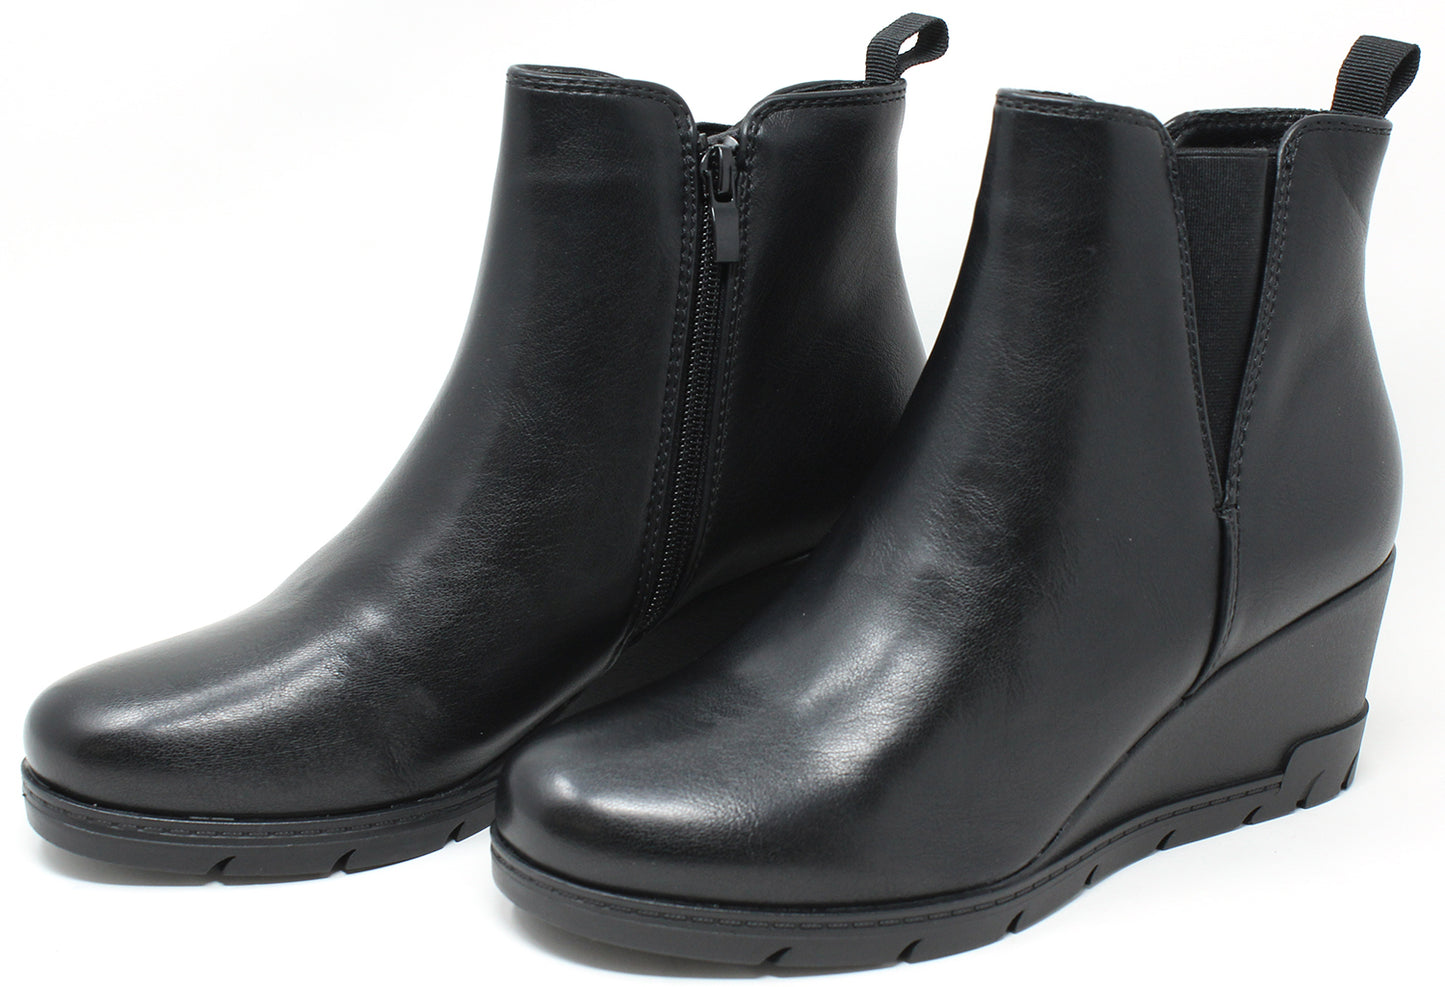 Faux Leather Wedged Boots